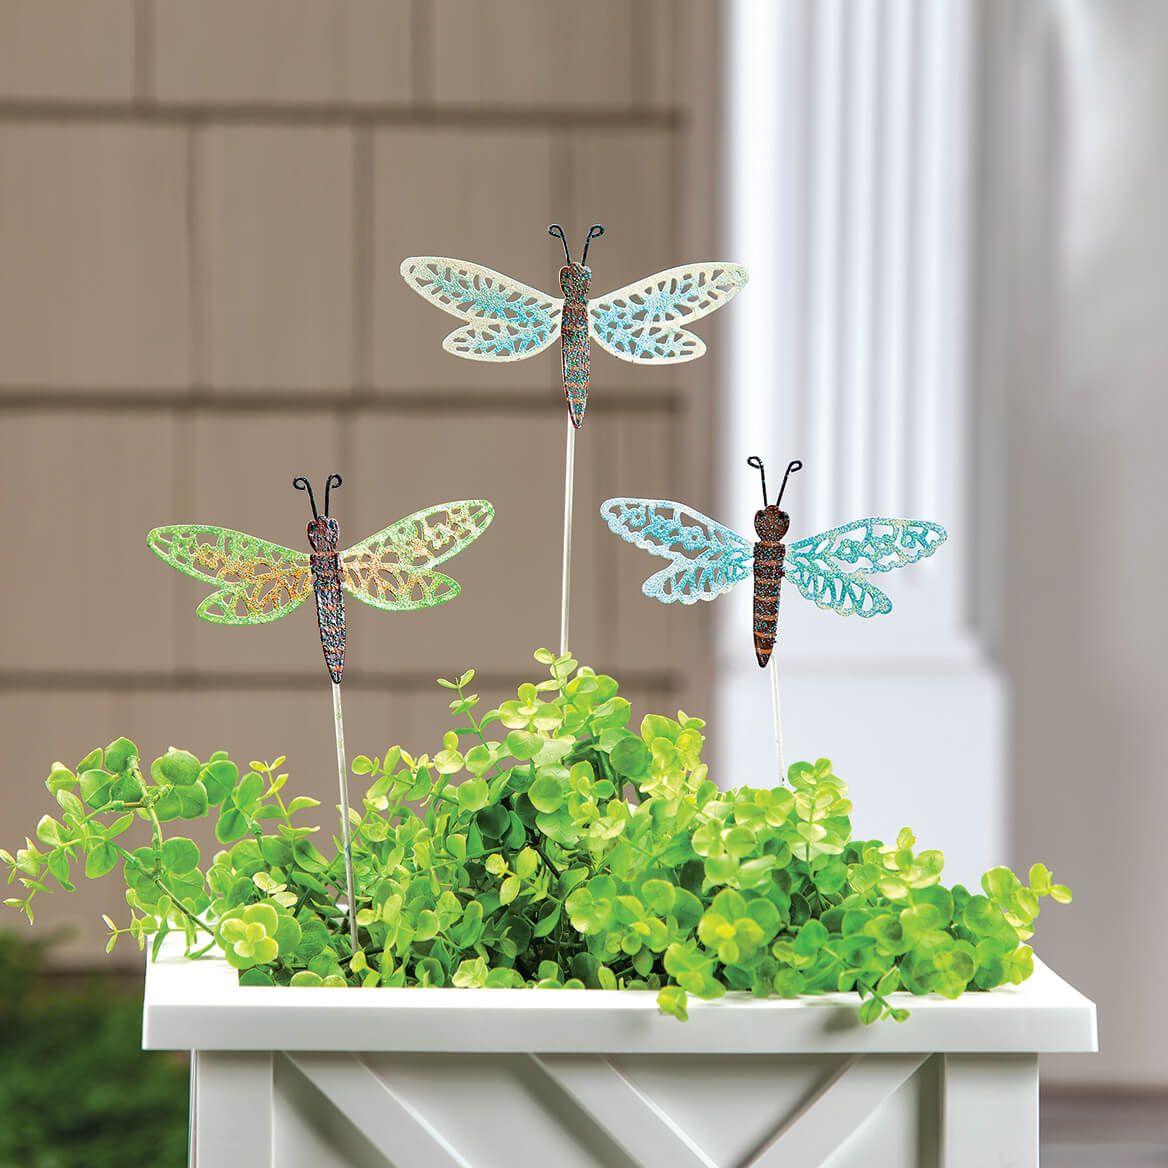 Metal Dragonfly Stakes by Fox River Creations, Set of 3 + '-' + 372750